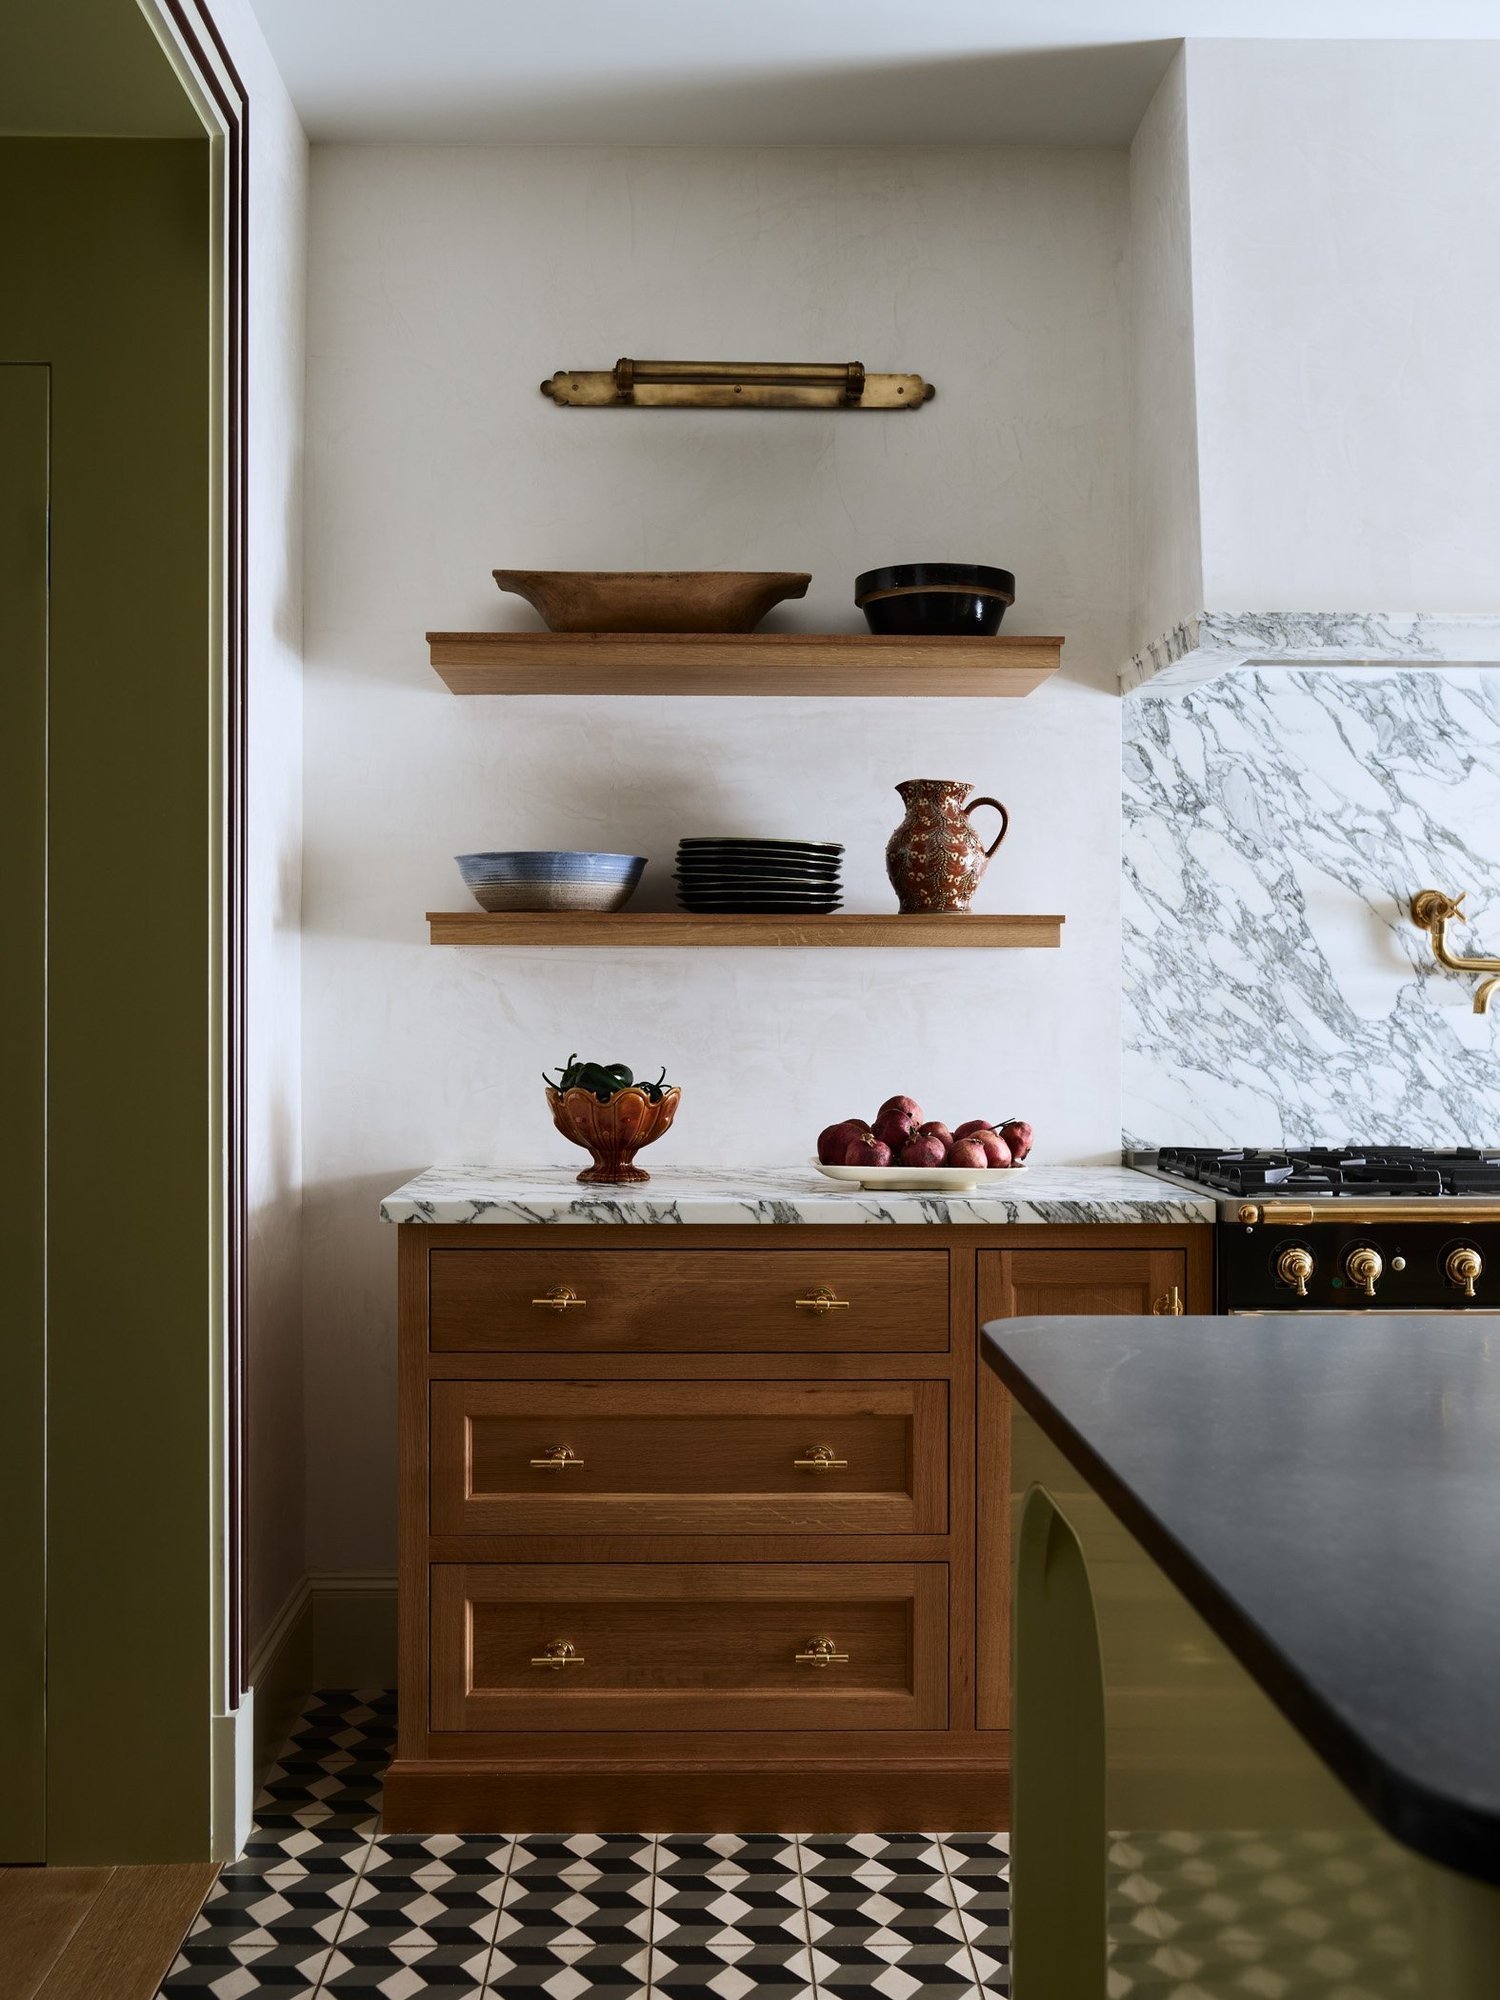 Sacramento interior design kitchen with vintage accents and classic statement pieces